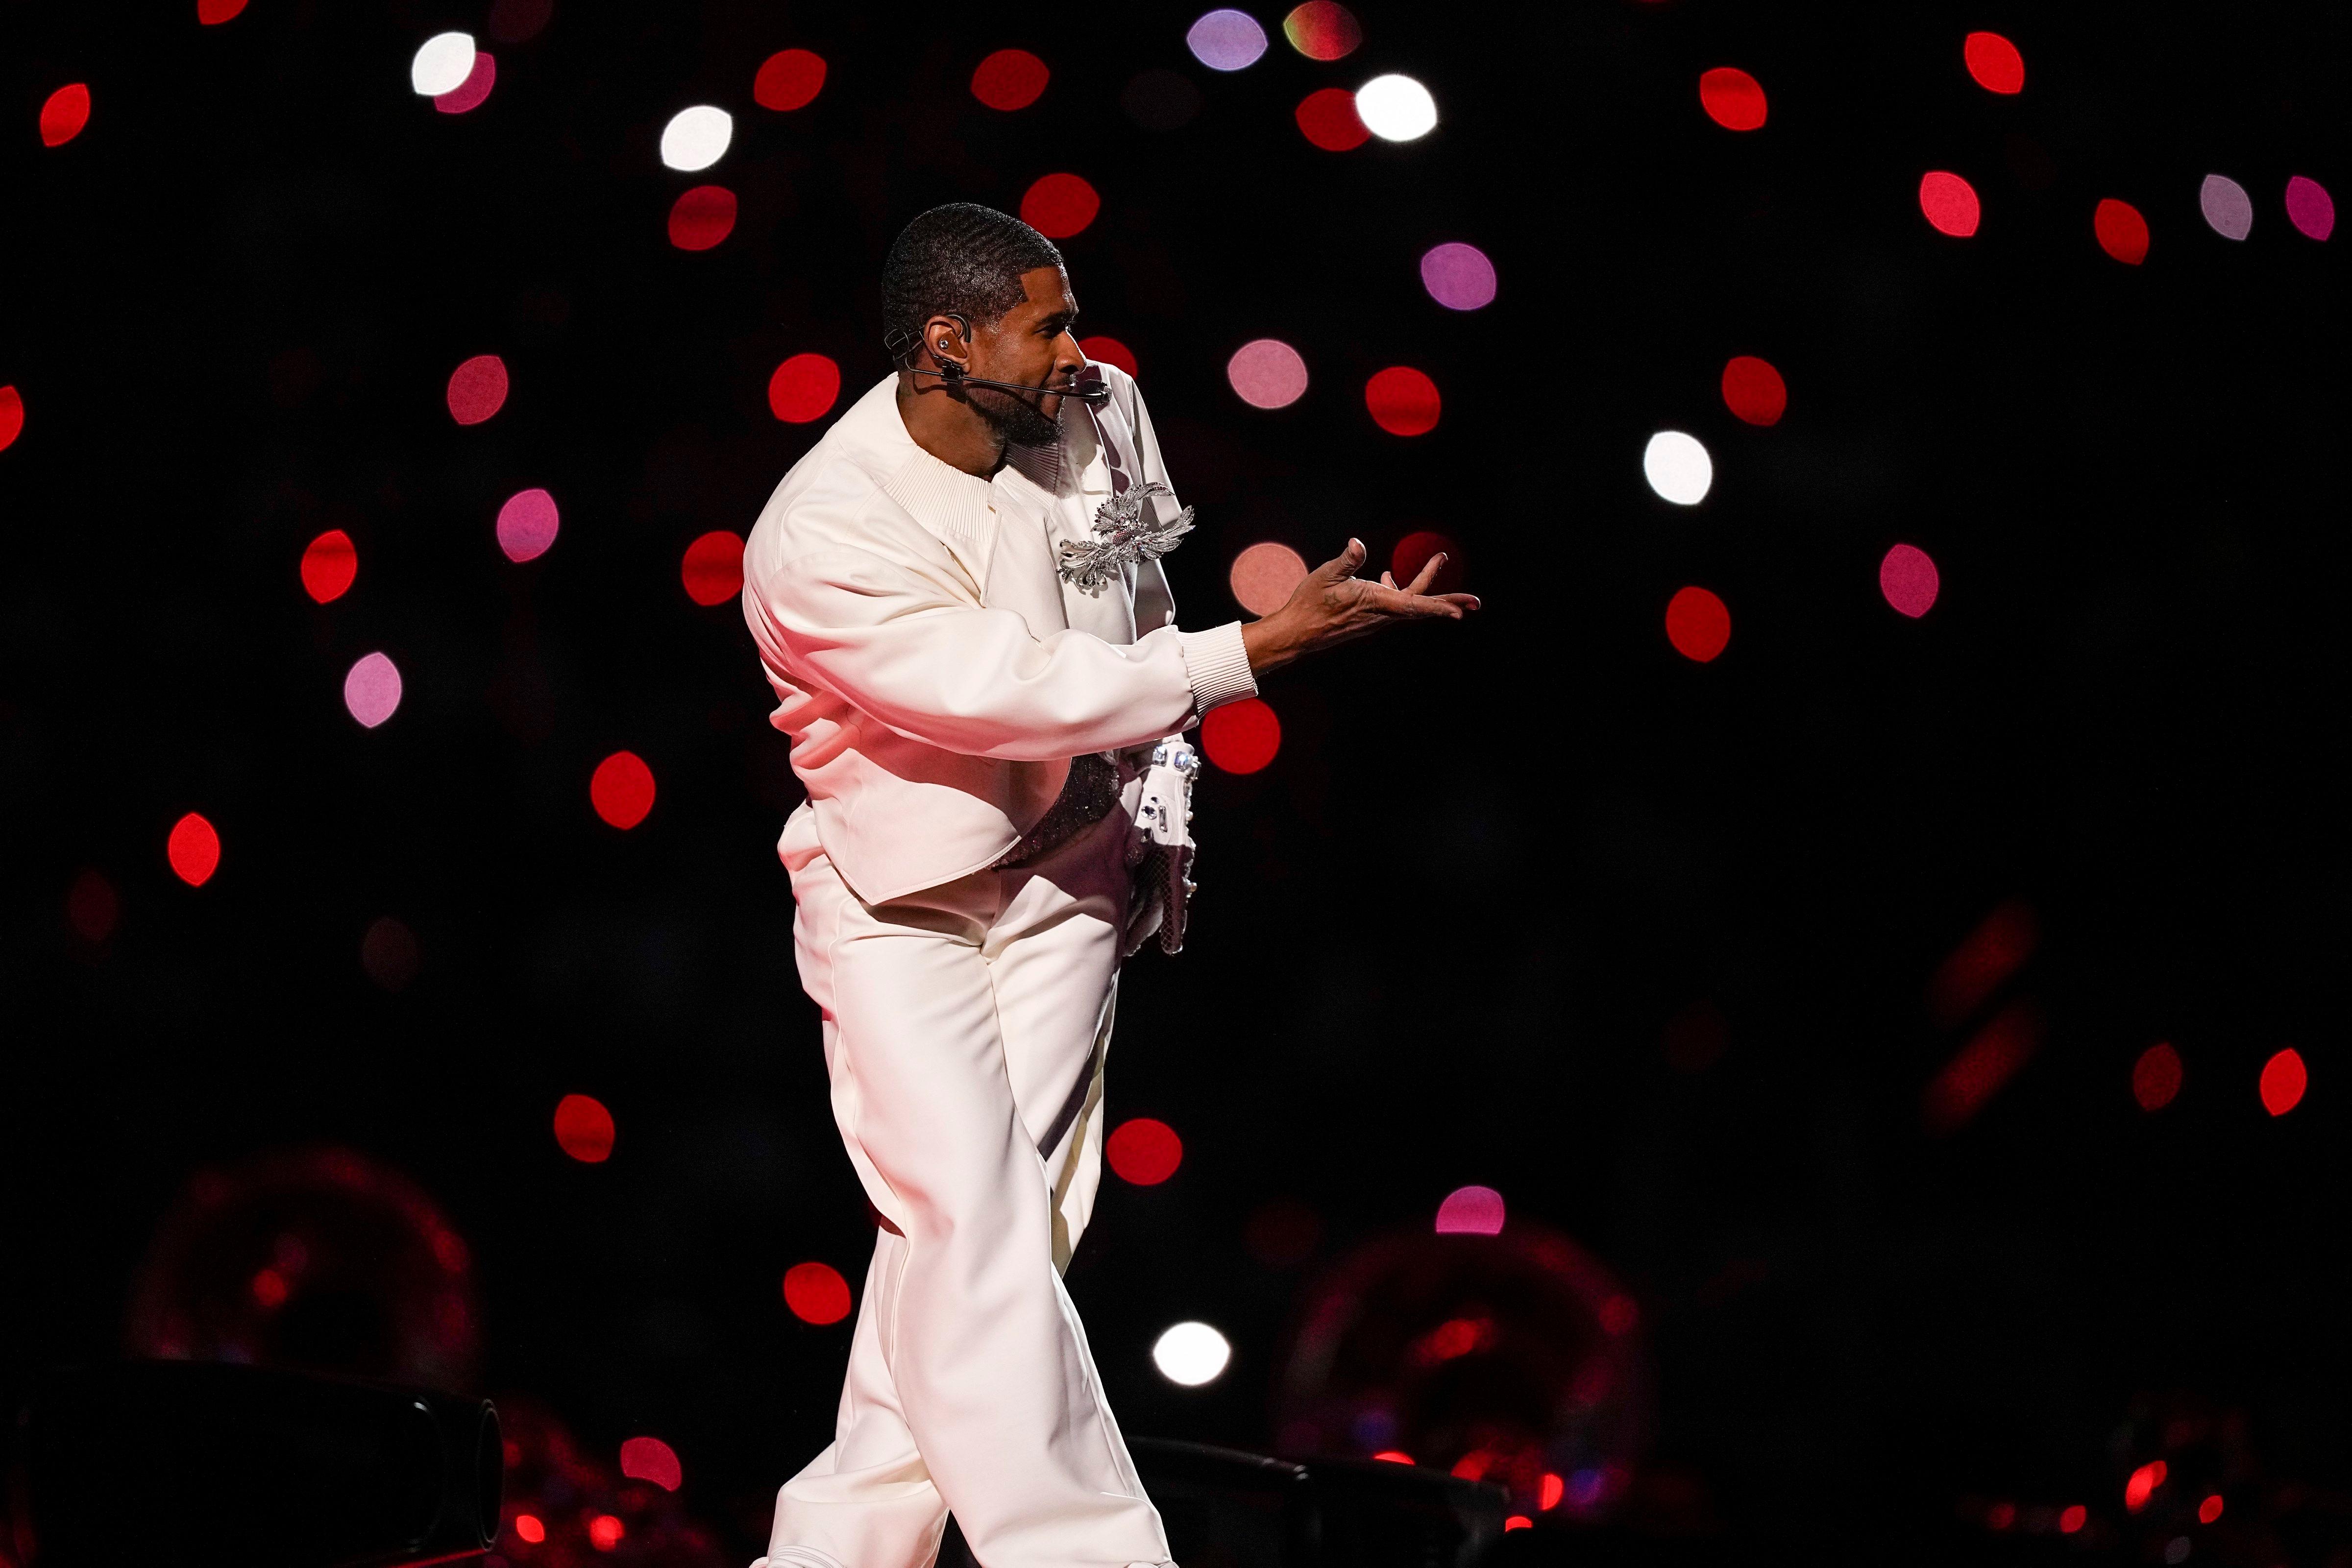 His show paid homage to Michael Jackson, who with his 1993 set transformed the halftime gig into one of music's most-watched -- and most-coveted. At one point Usher donned a single glove, a clear nod to the groundbreaking pop artist. 